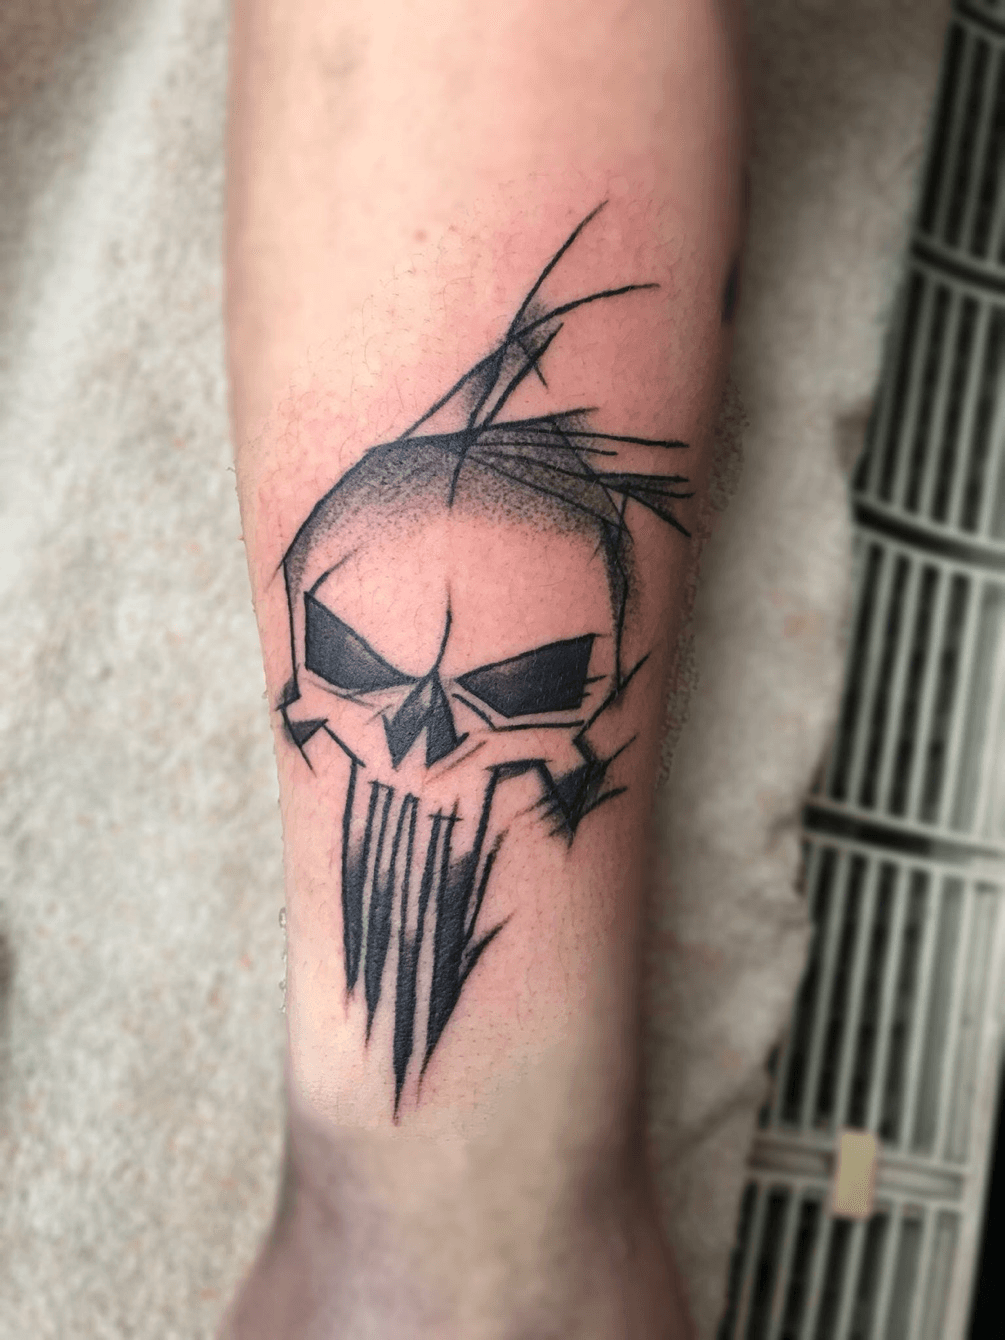 10 Mindblowing Punisher tattoo ideas for him and her